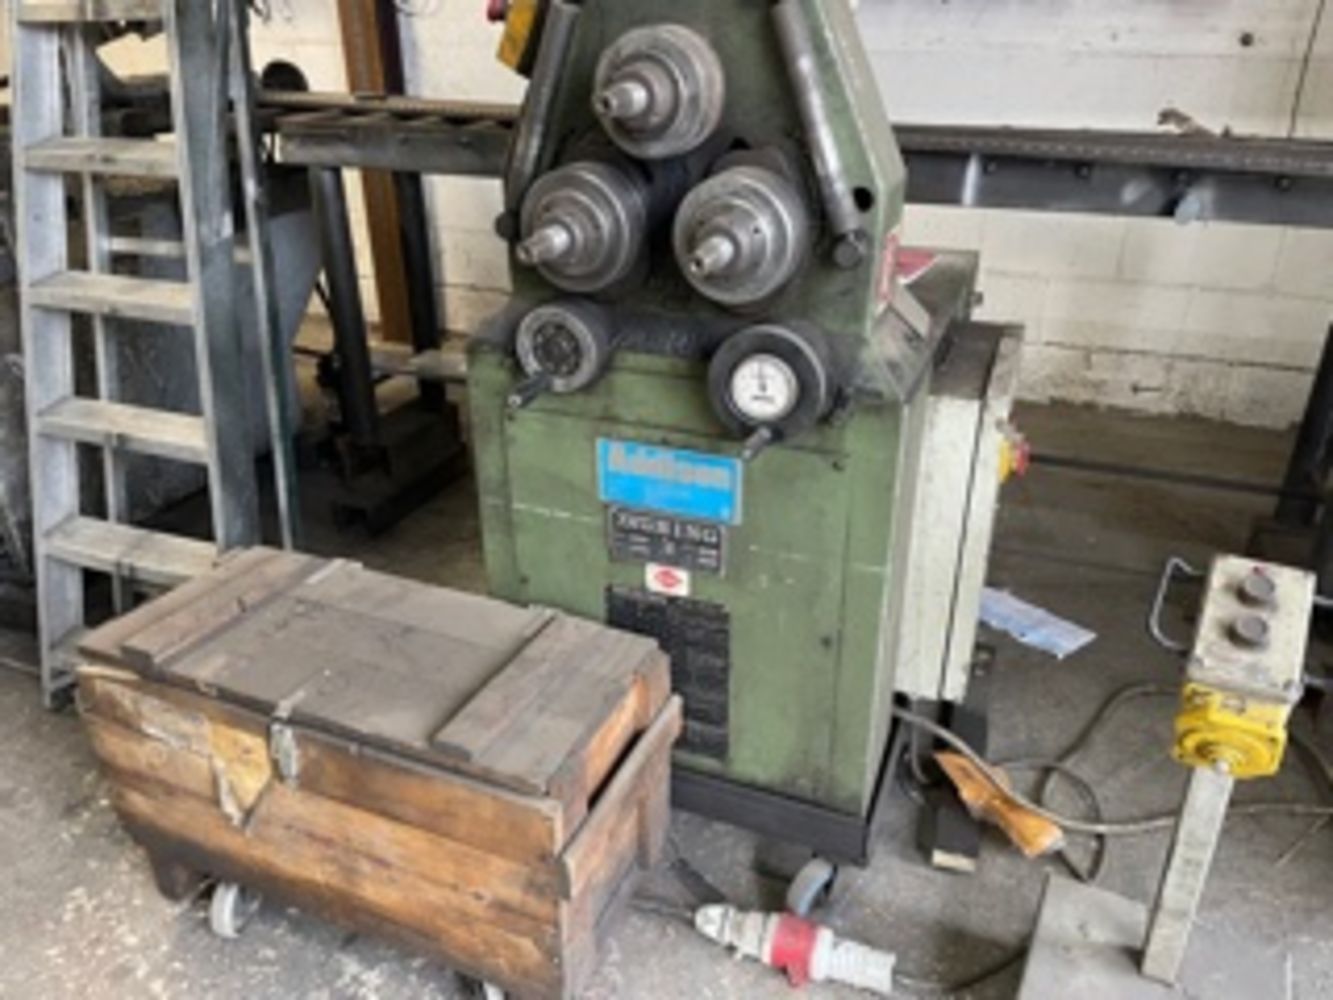 Metal Fabrication Business Machinery & Equipment- Auction Sale- (No Reserve)